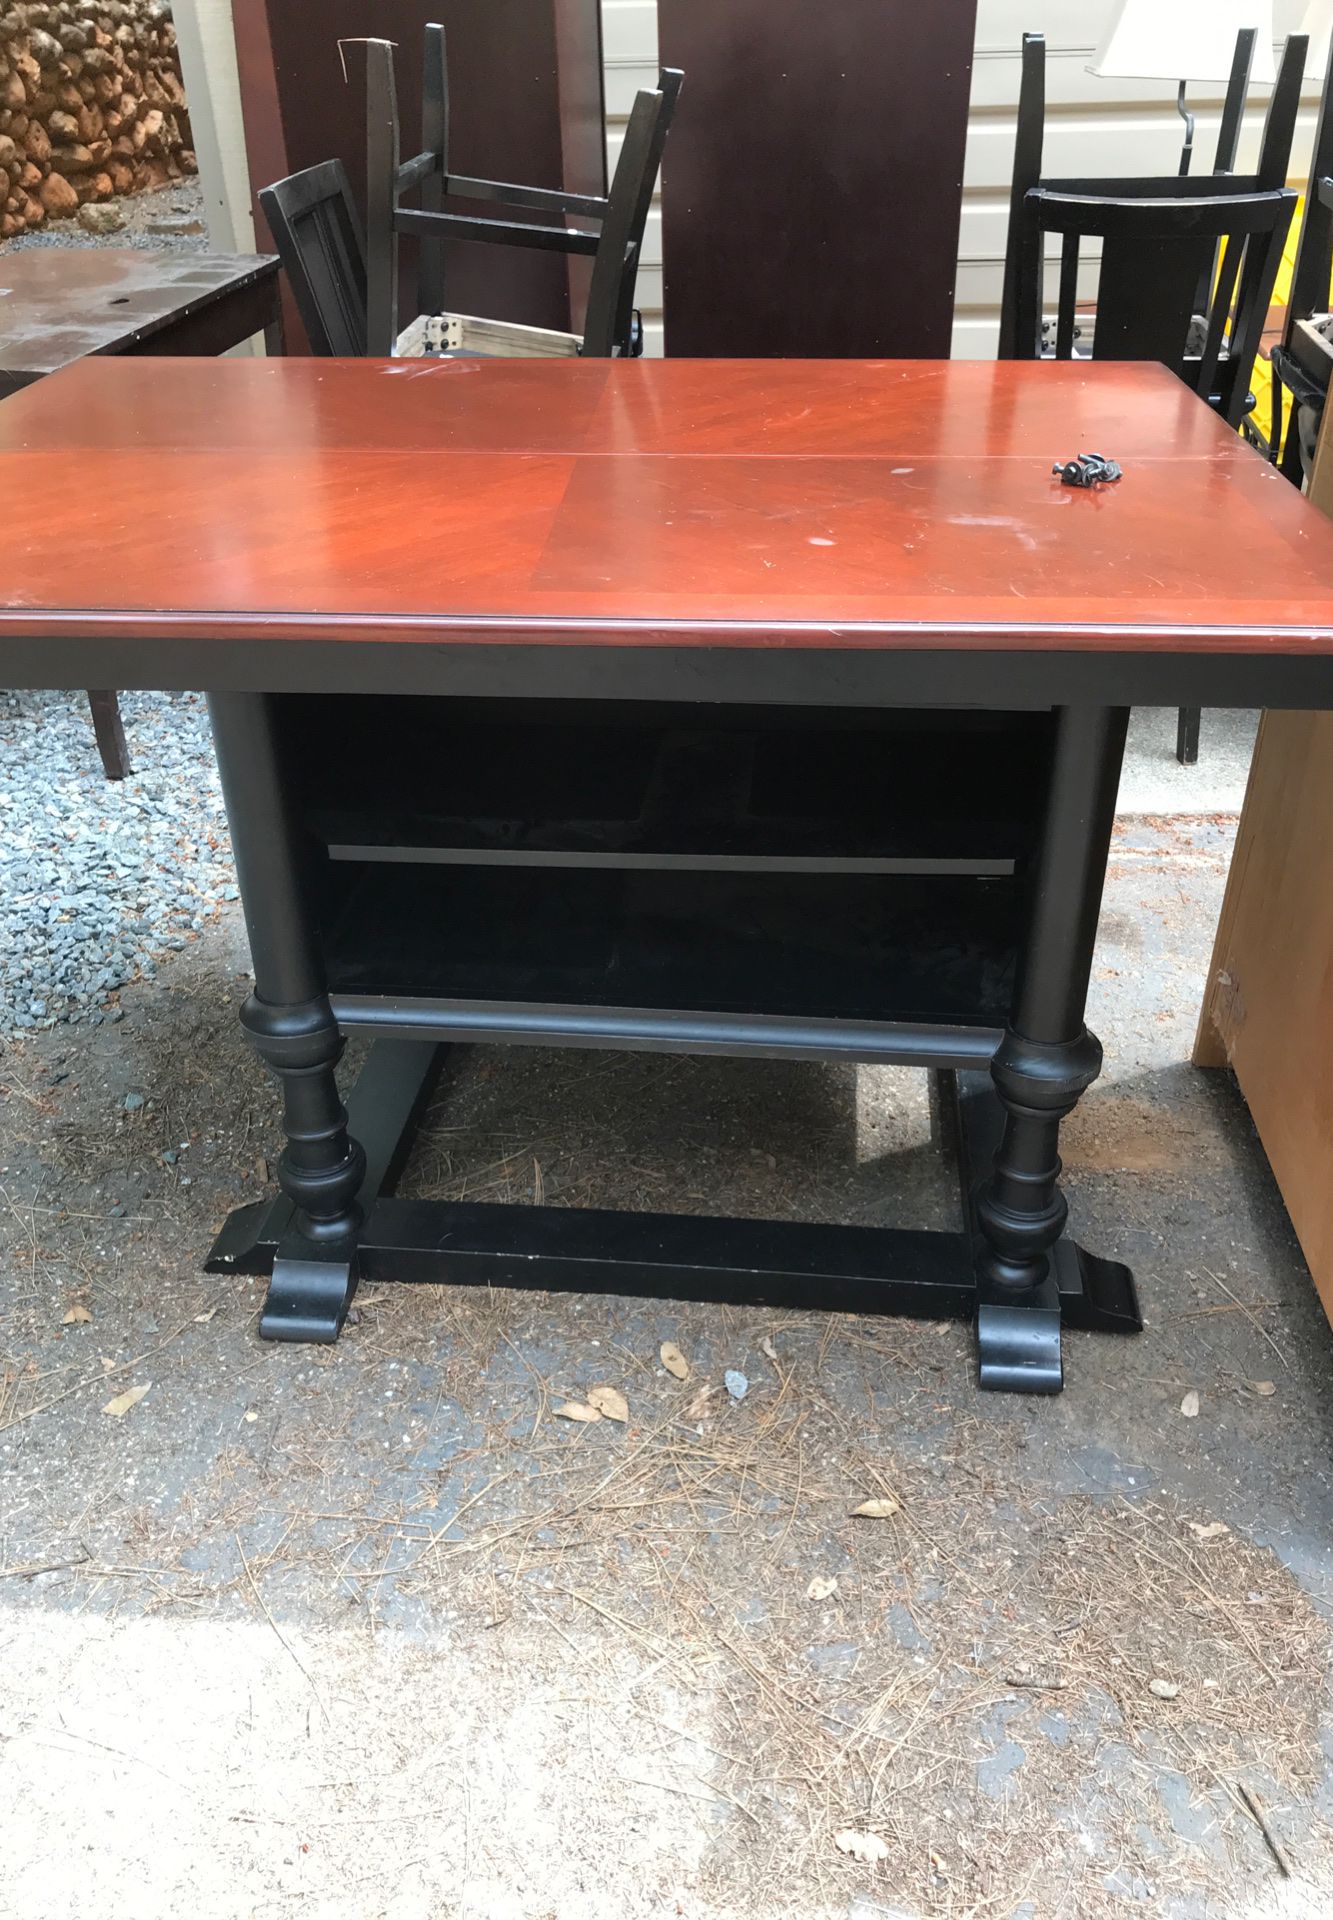 Bar height kitchen table and chairs